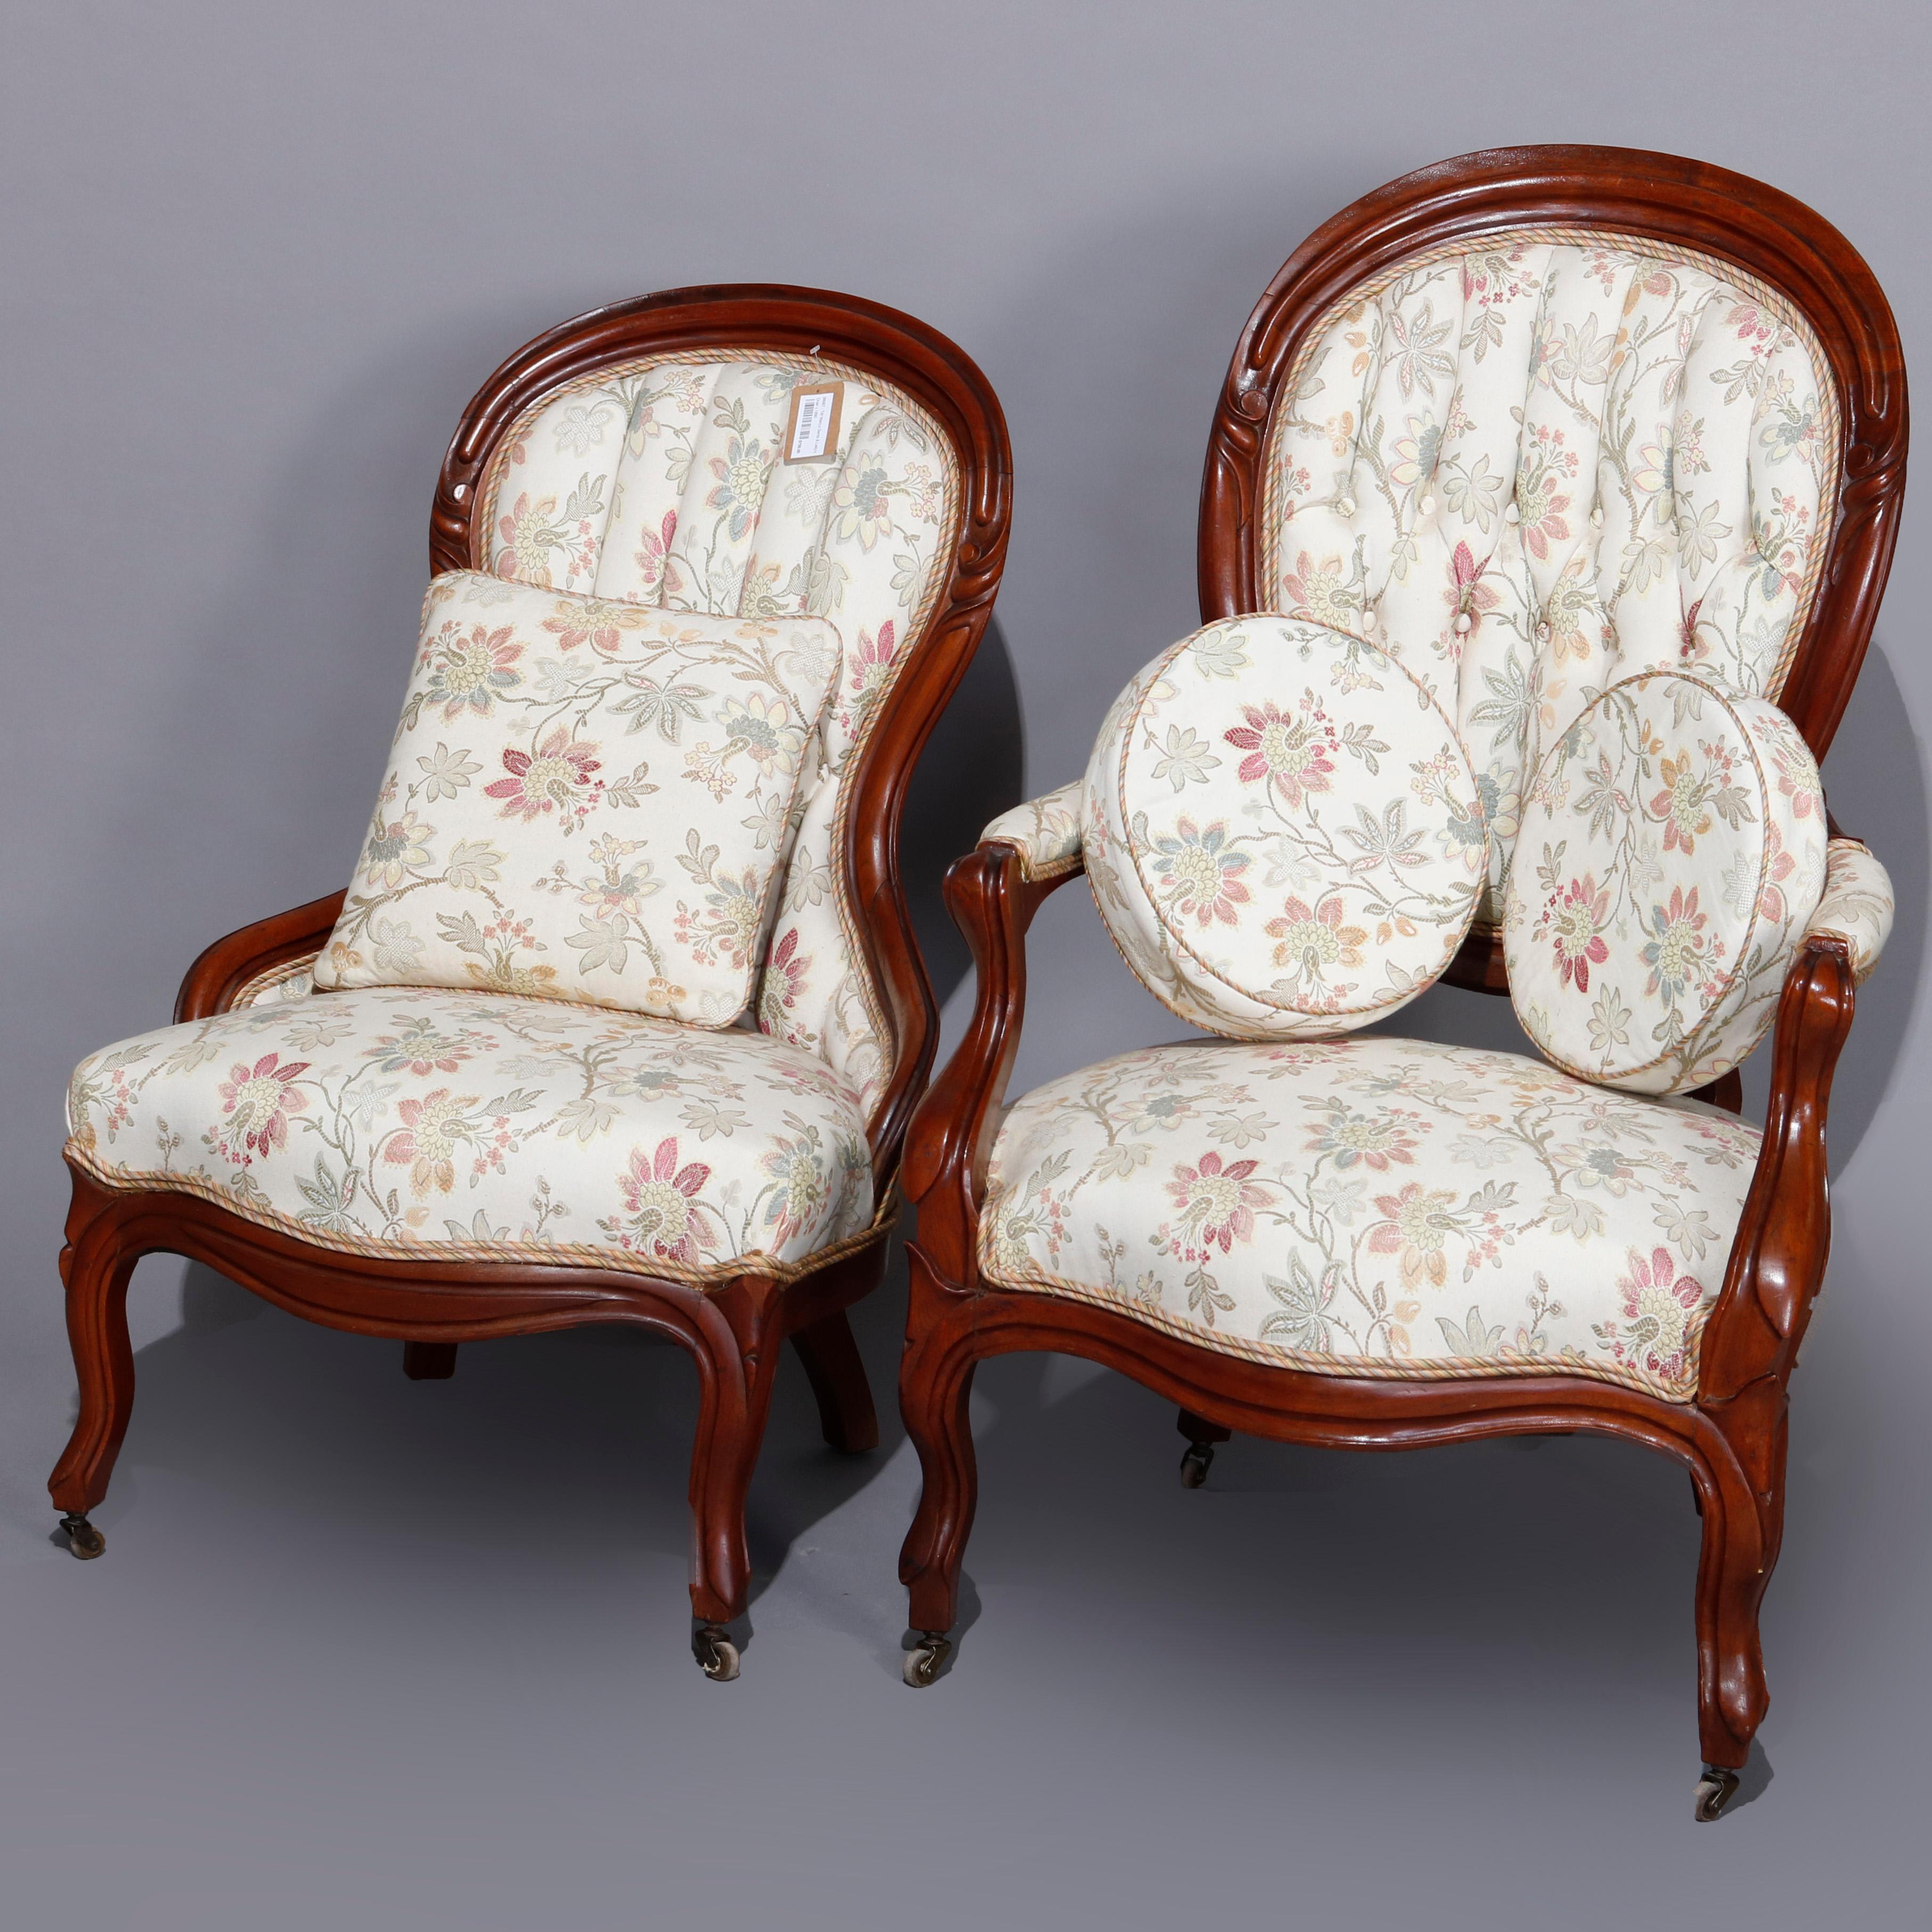 Antique Victorian Carved Walnut Upholstered Parlor Chair Set, circa 1890 3